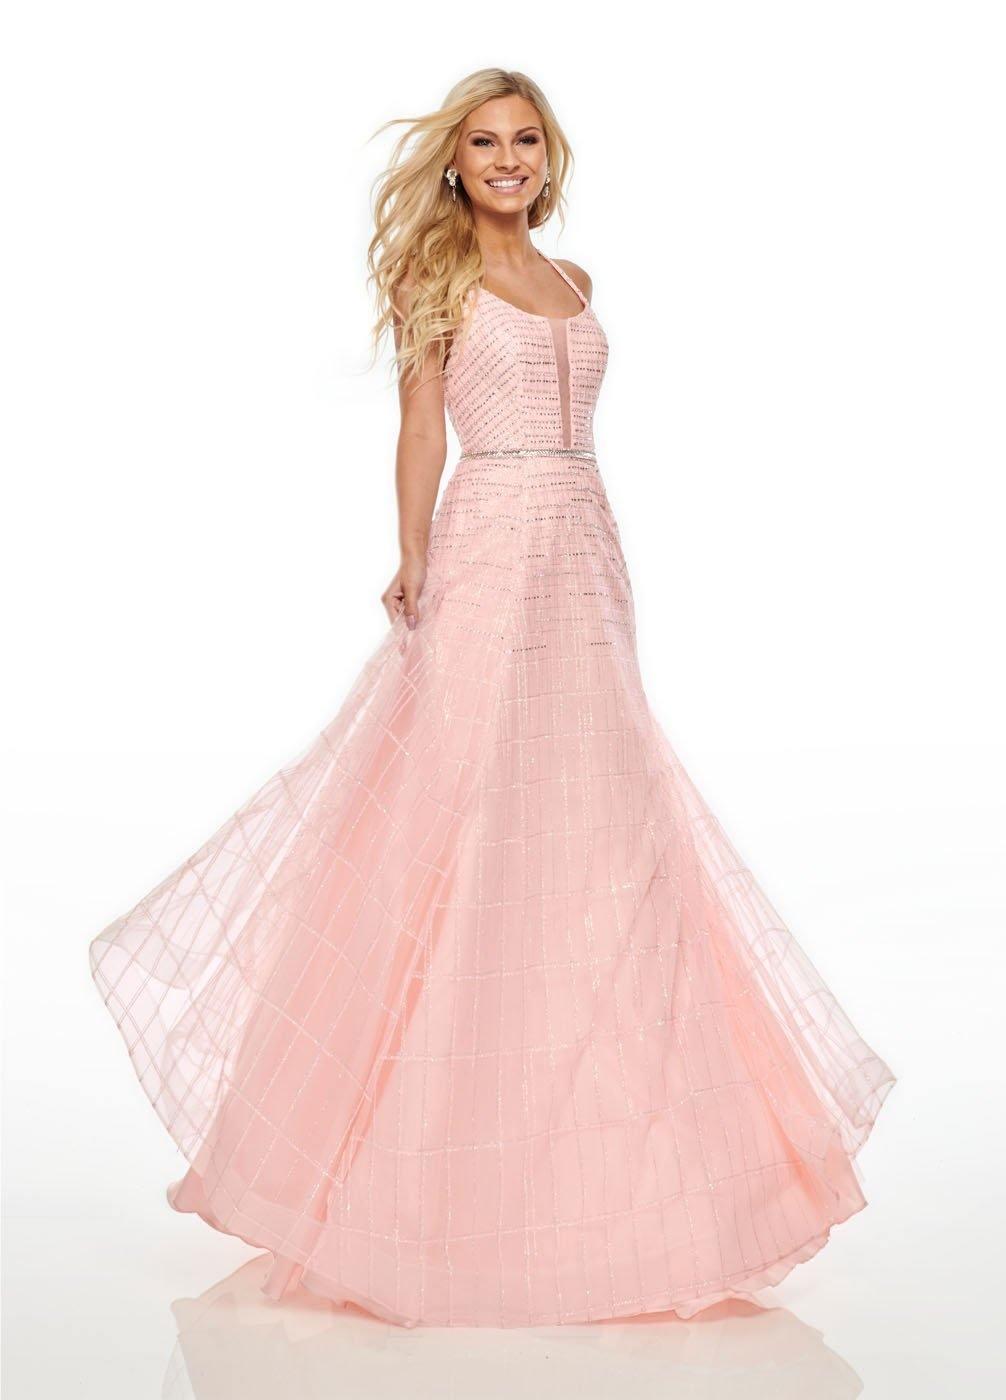 Long Prom Dress Evening Gown for $399.99 – The Dress Outlet